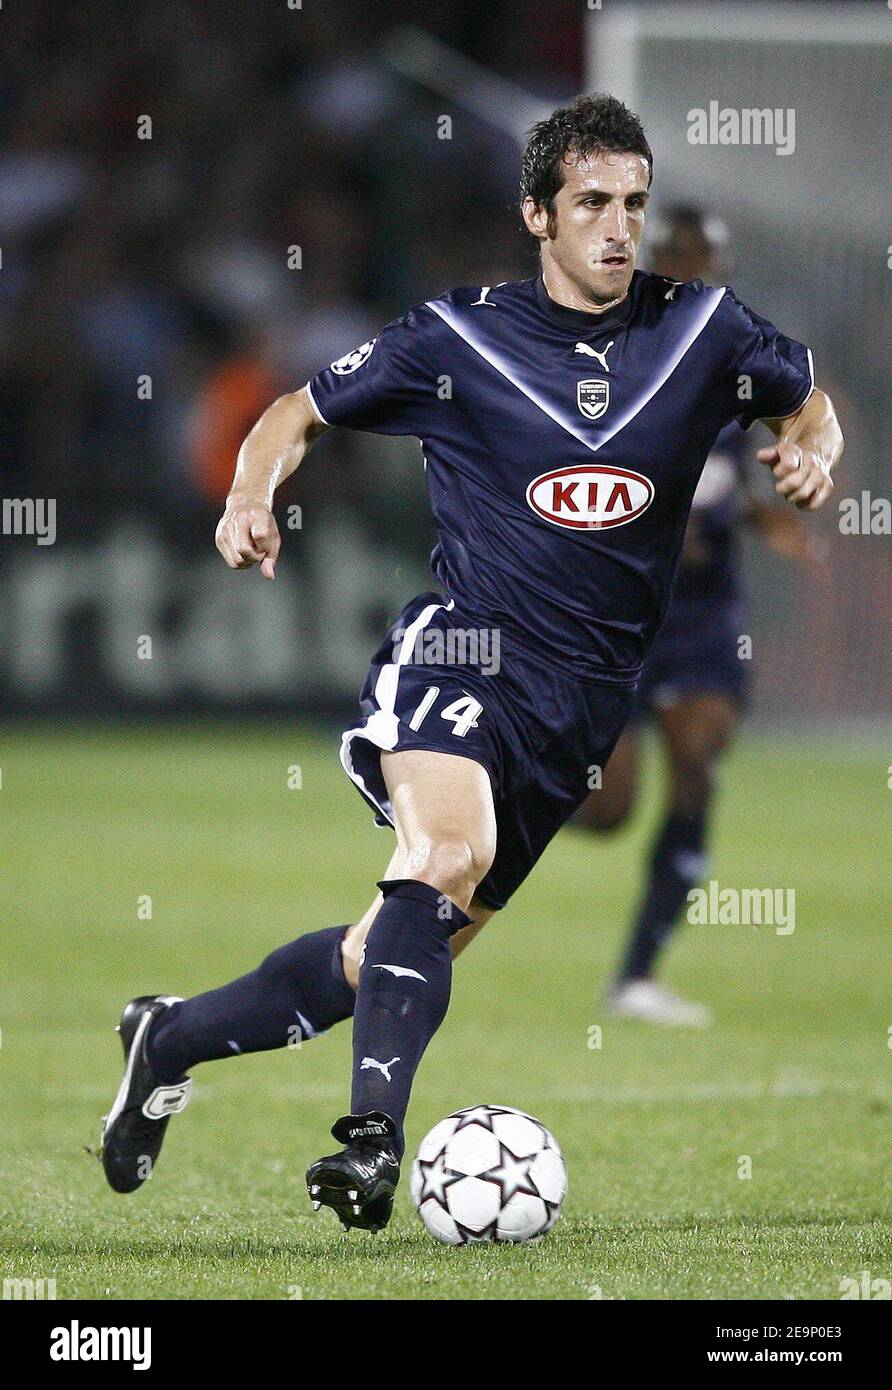 Bordeaux' Johan Micoud during the UEFA Champions League, Group C, Girondins de Bordeaux vs Liverpool FC at the Stade Chaban-Delmas in Bordeaux, France on October 18, 2006. Liverpool won 1-0. Photo by Christian Liewig/ABACAPRESS.COM Stock Photo